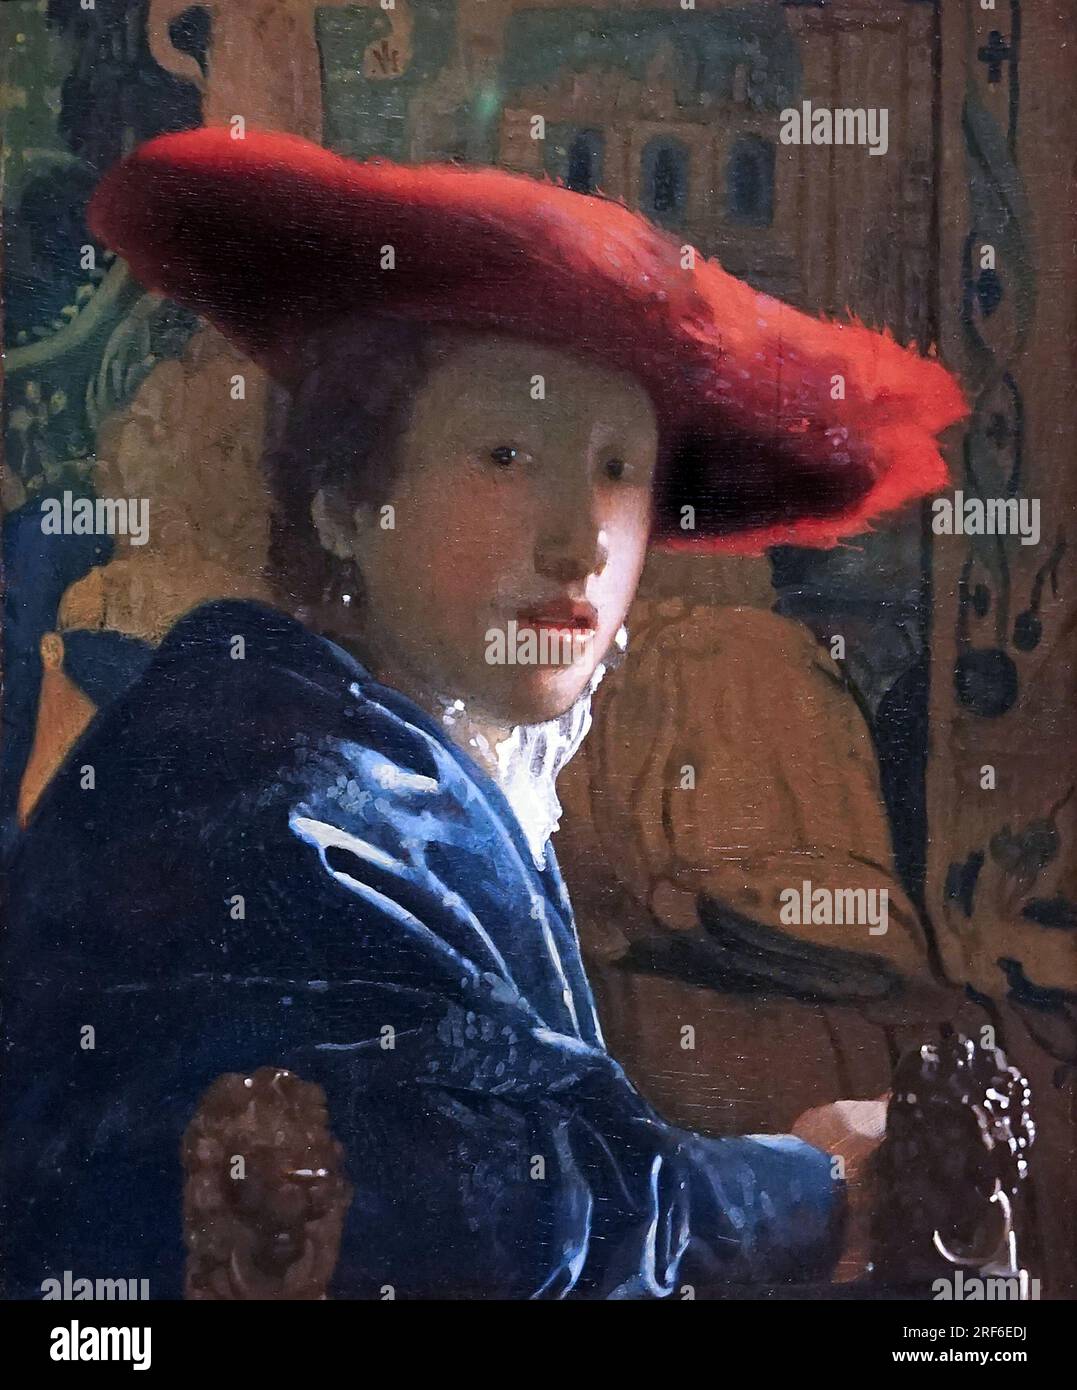 Girl with the Red Hat by Johannes Vermeer Jan Vermeer (1632 - 1675).Dutch Baroque Period painter. Stock Photo